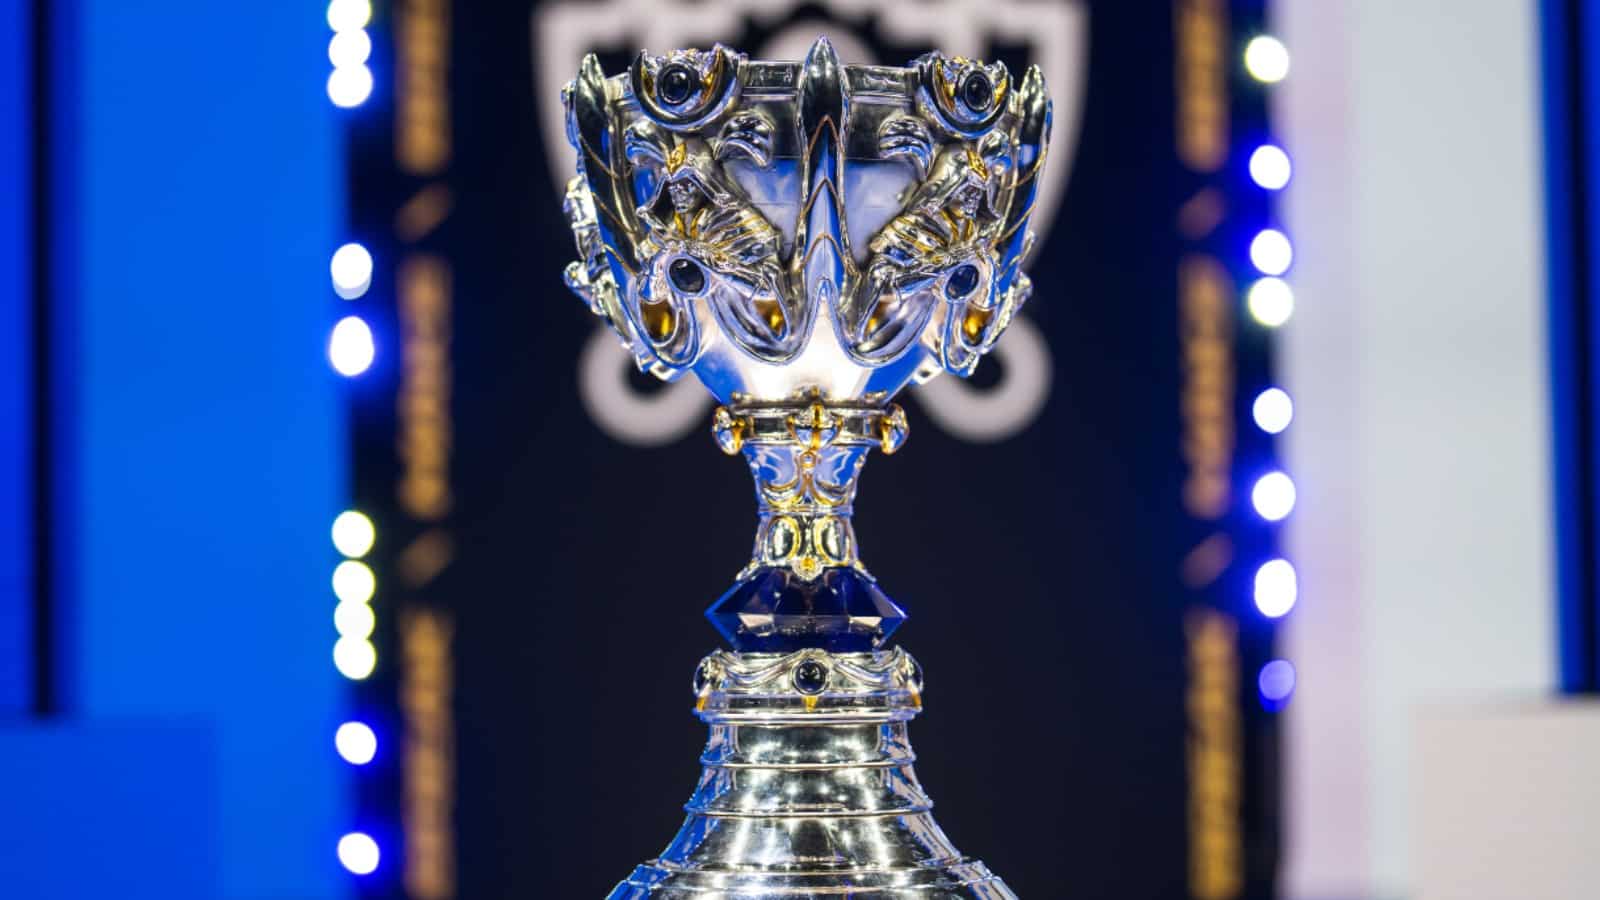 Image of the Worlds trophy, the Summoner's Cup